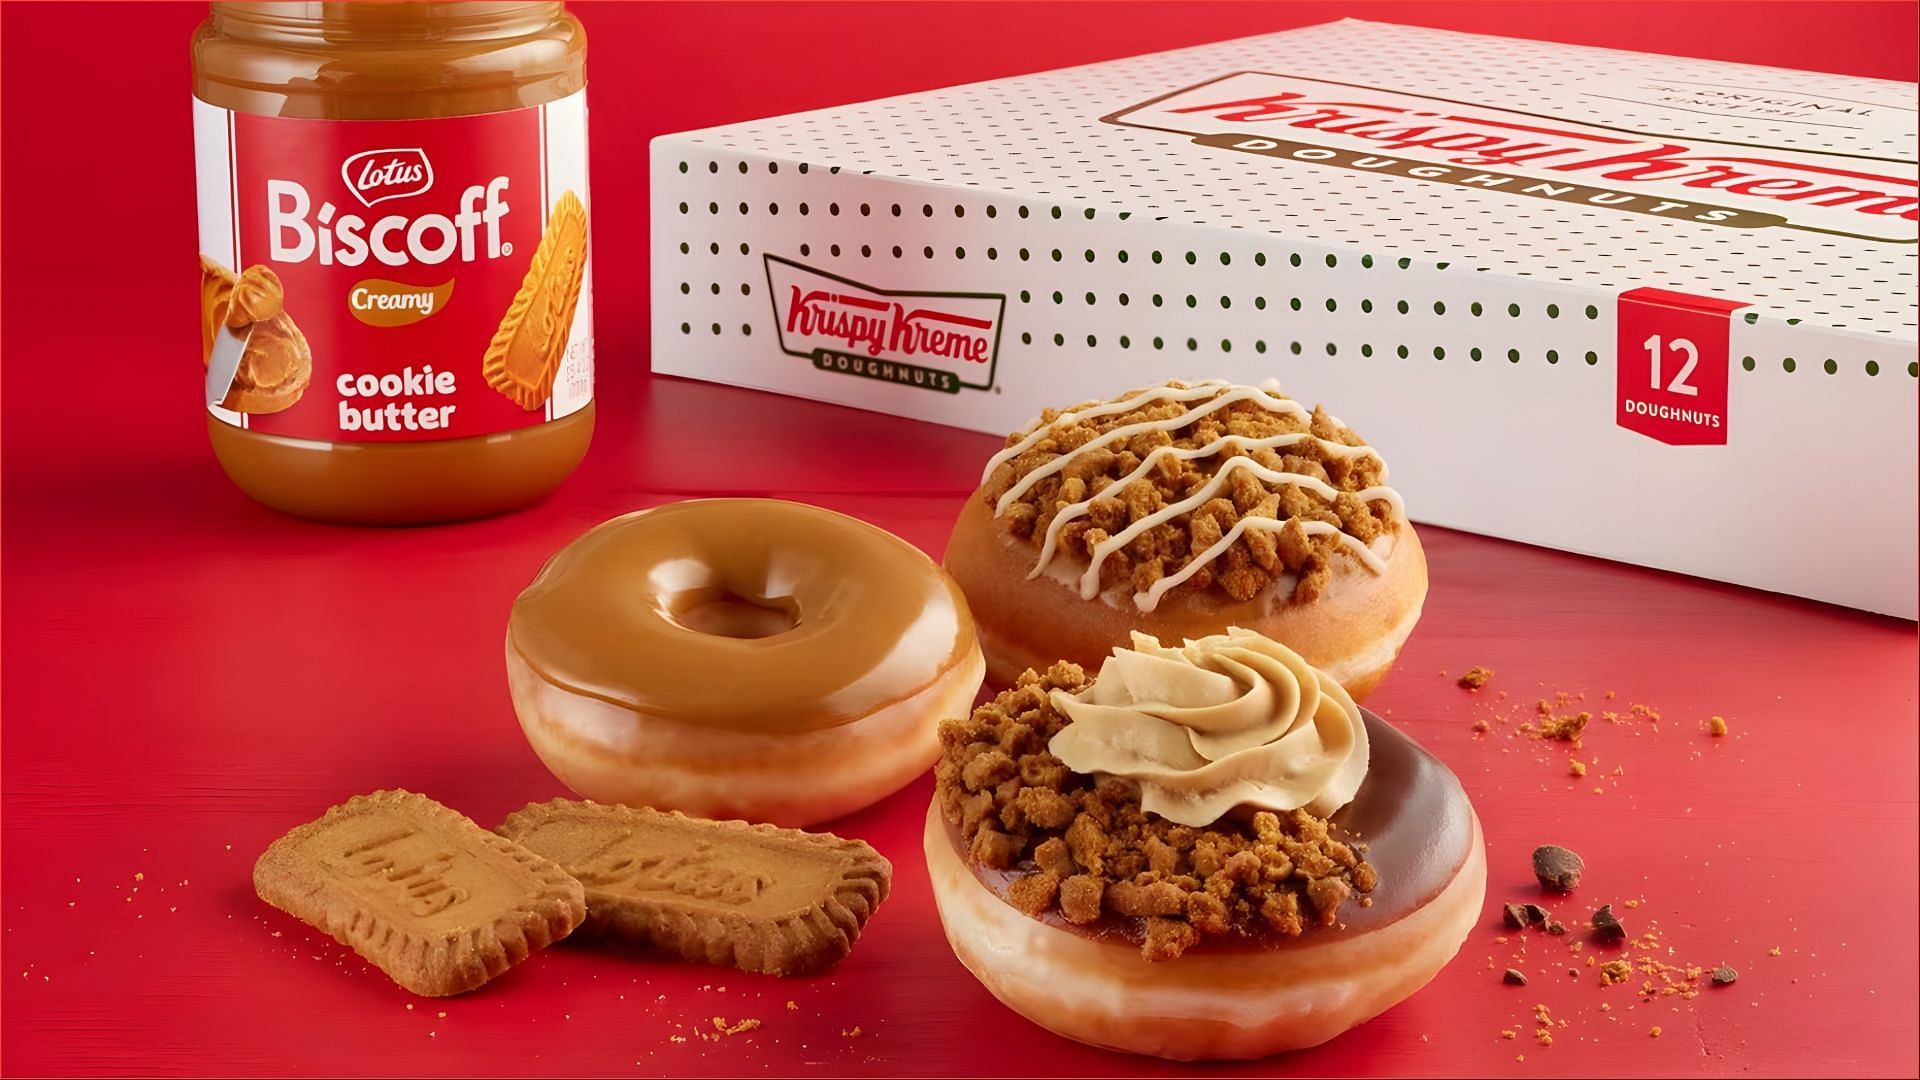 The Biscoff doughnuts are now available on the menu (Image via Krispy Kreme)